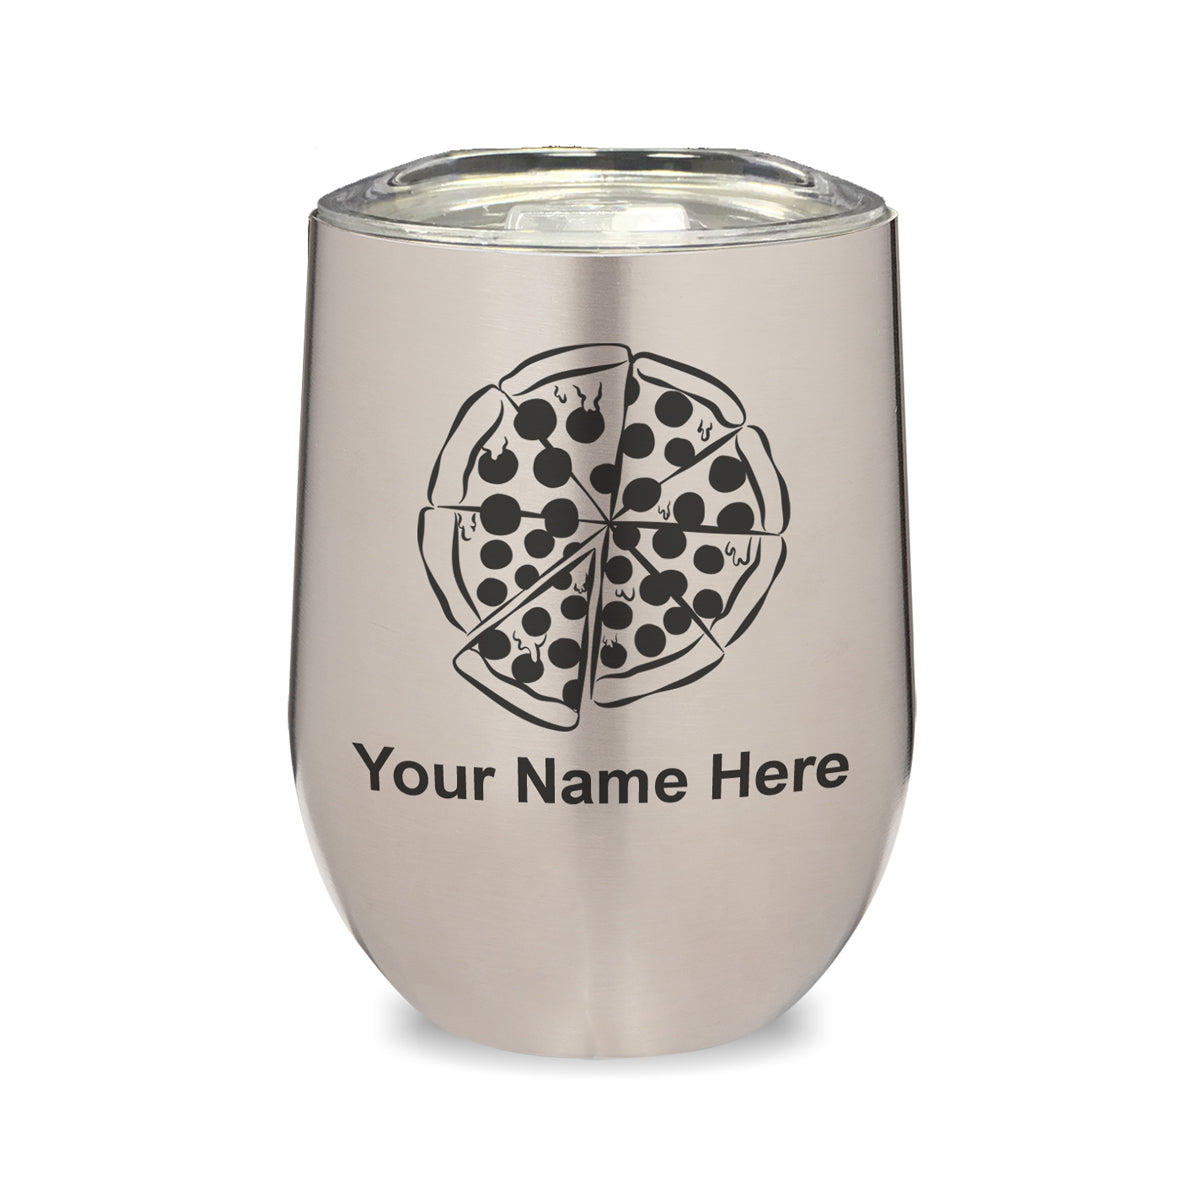 LaserGram Double Wall Stainless Steel Wine Glass, Pizza, Personalized Engraving Included